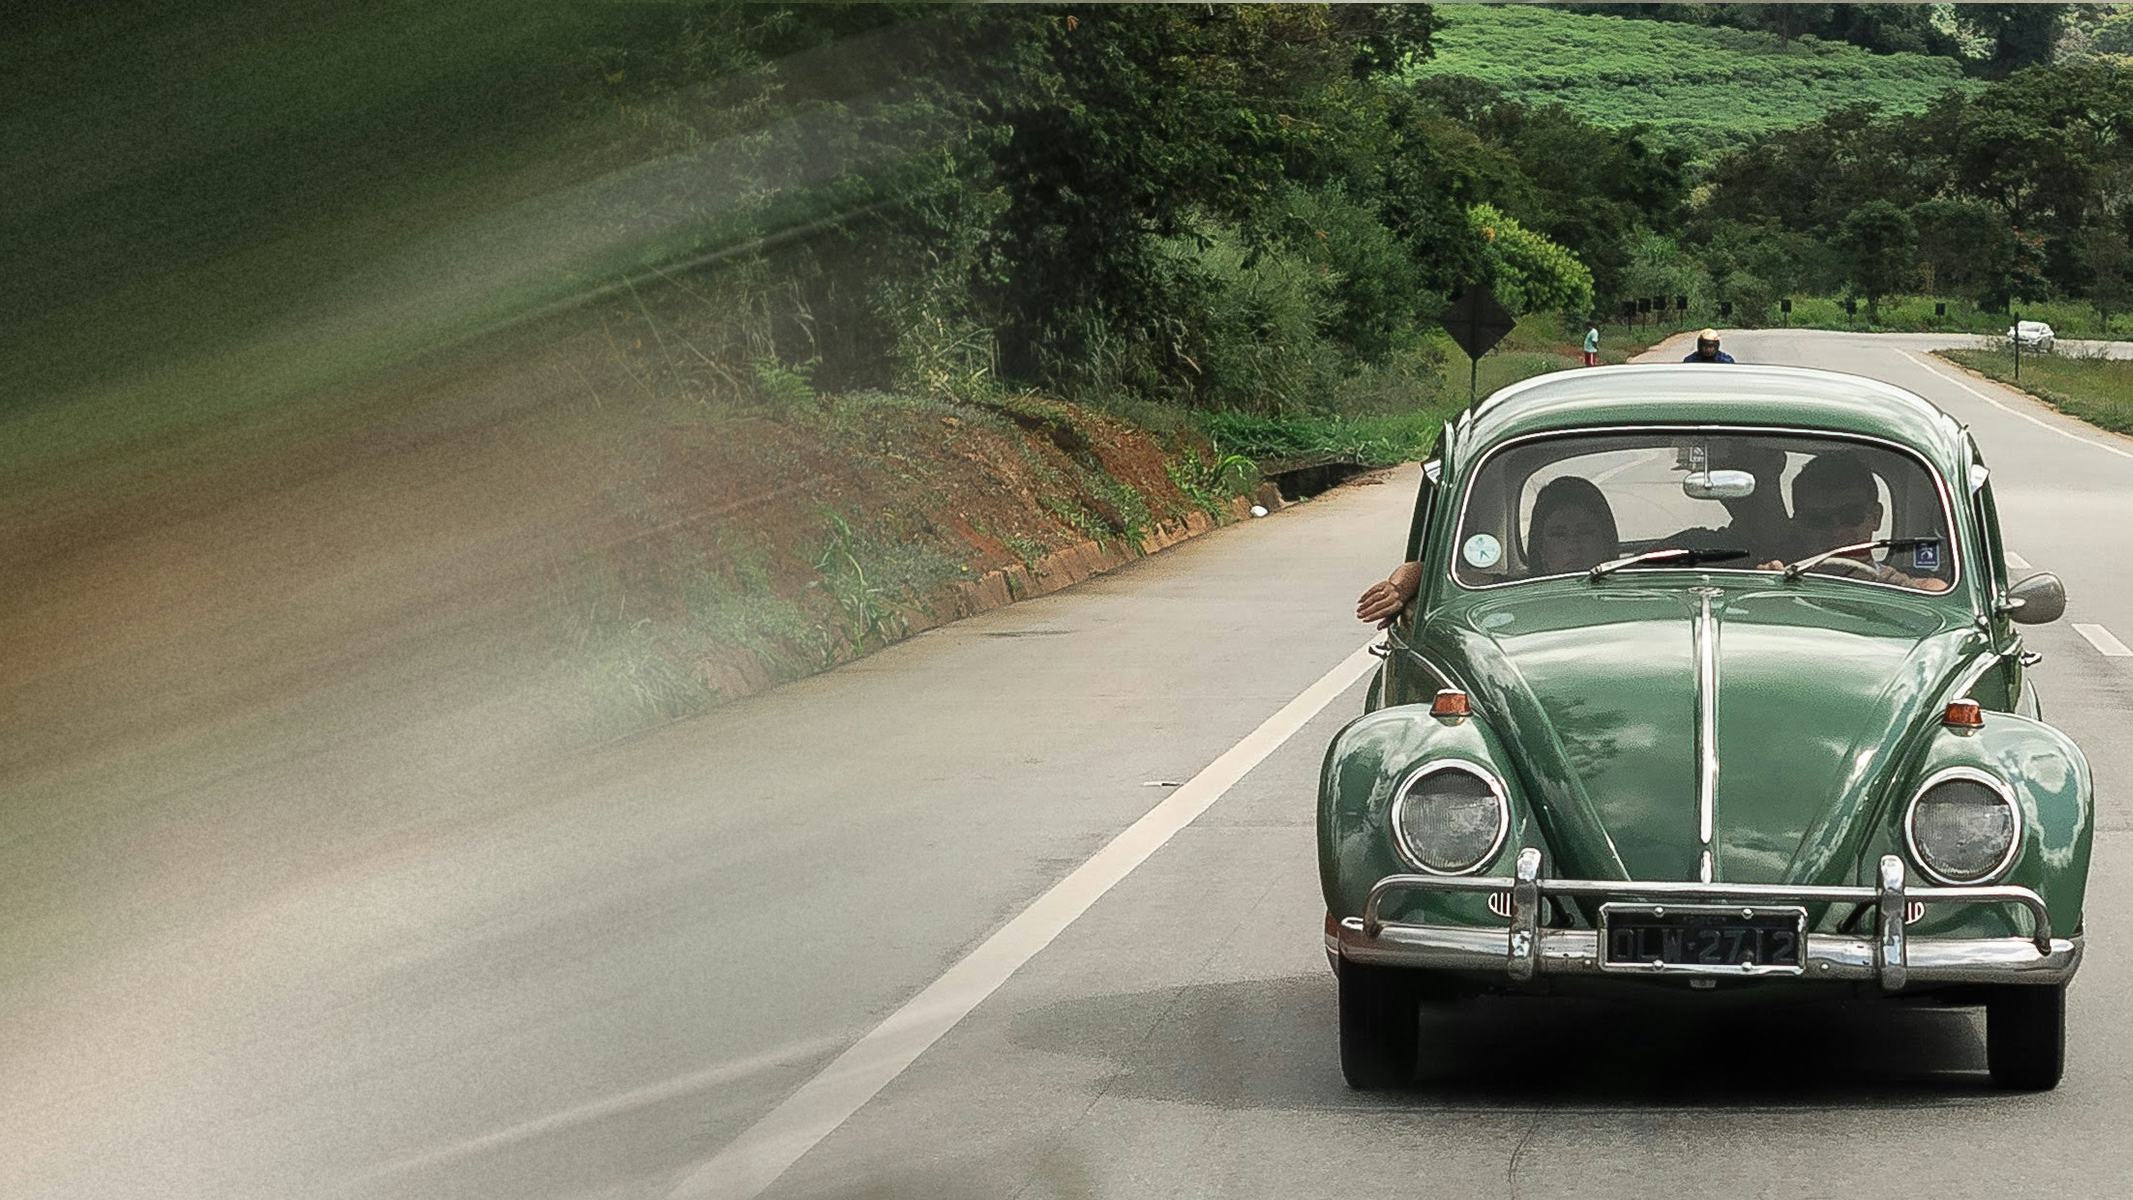 Couple in classic green Volkswagen car driving down a highway with forest in background. Get CAA roadside assistance today for more comprehensive coverage than your manufacturers roadside assistance plan (including honda roadside assistance, hyundai roadside assistance, ford roadside assistance, mazda roadside assistance, nissan roadside assistance)